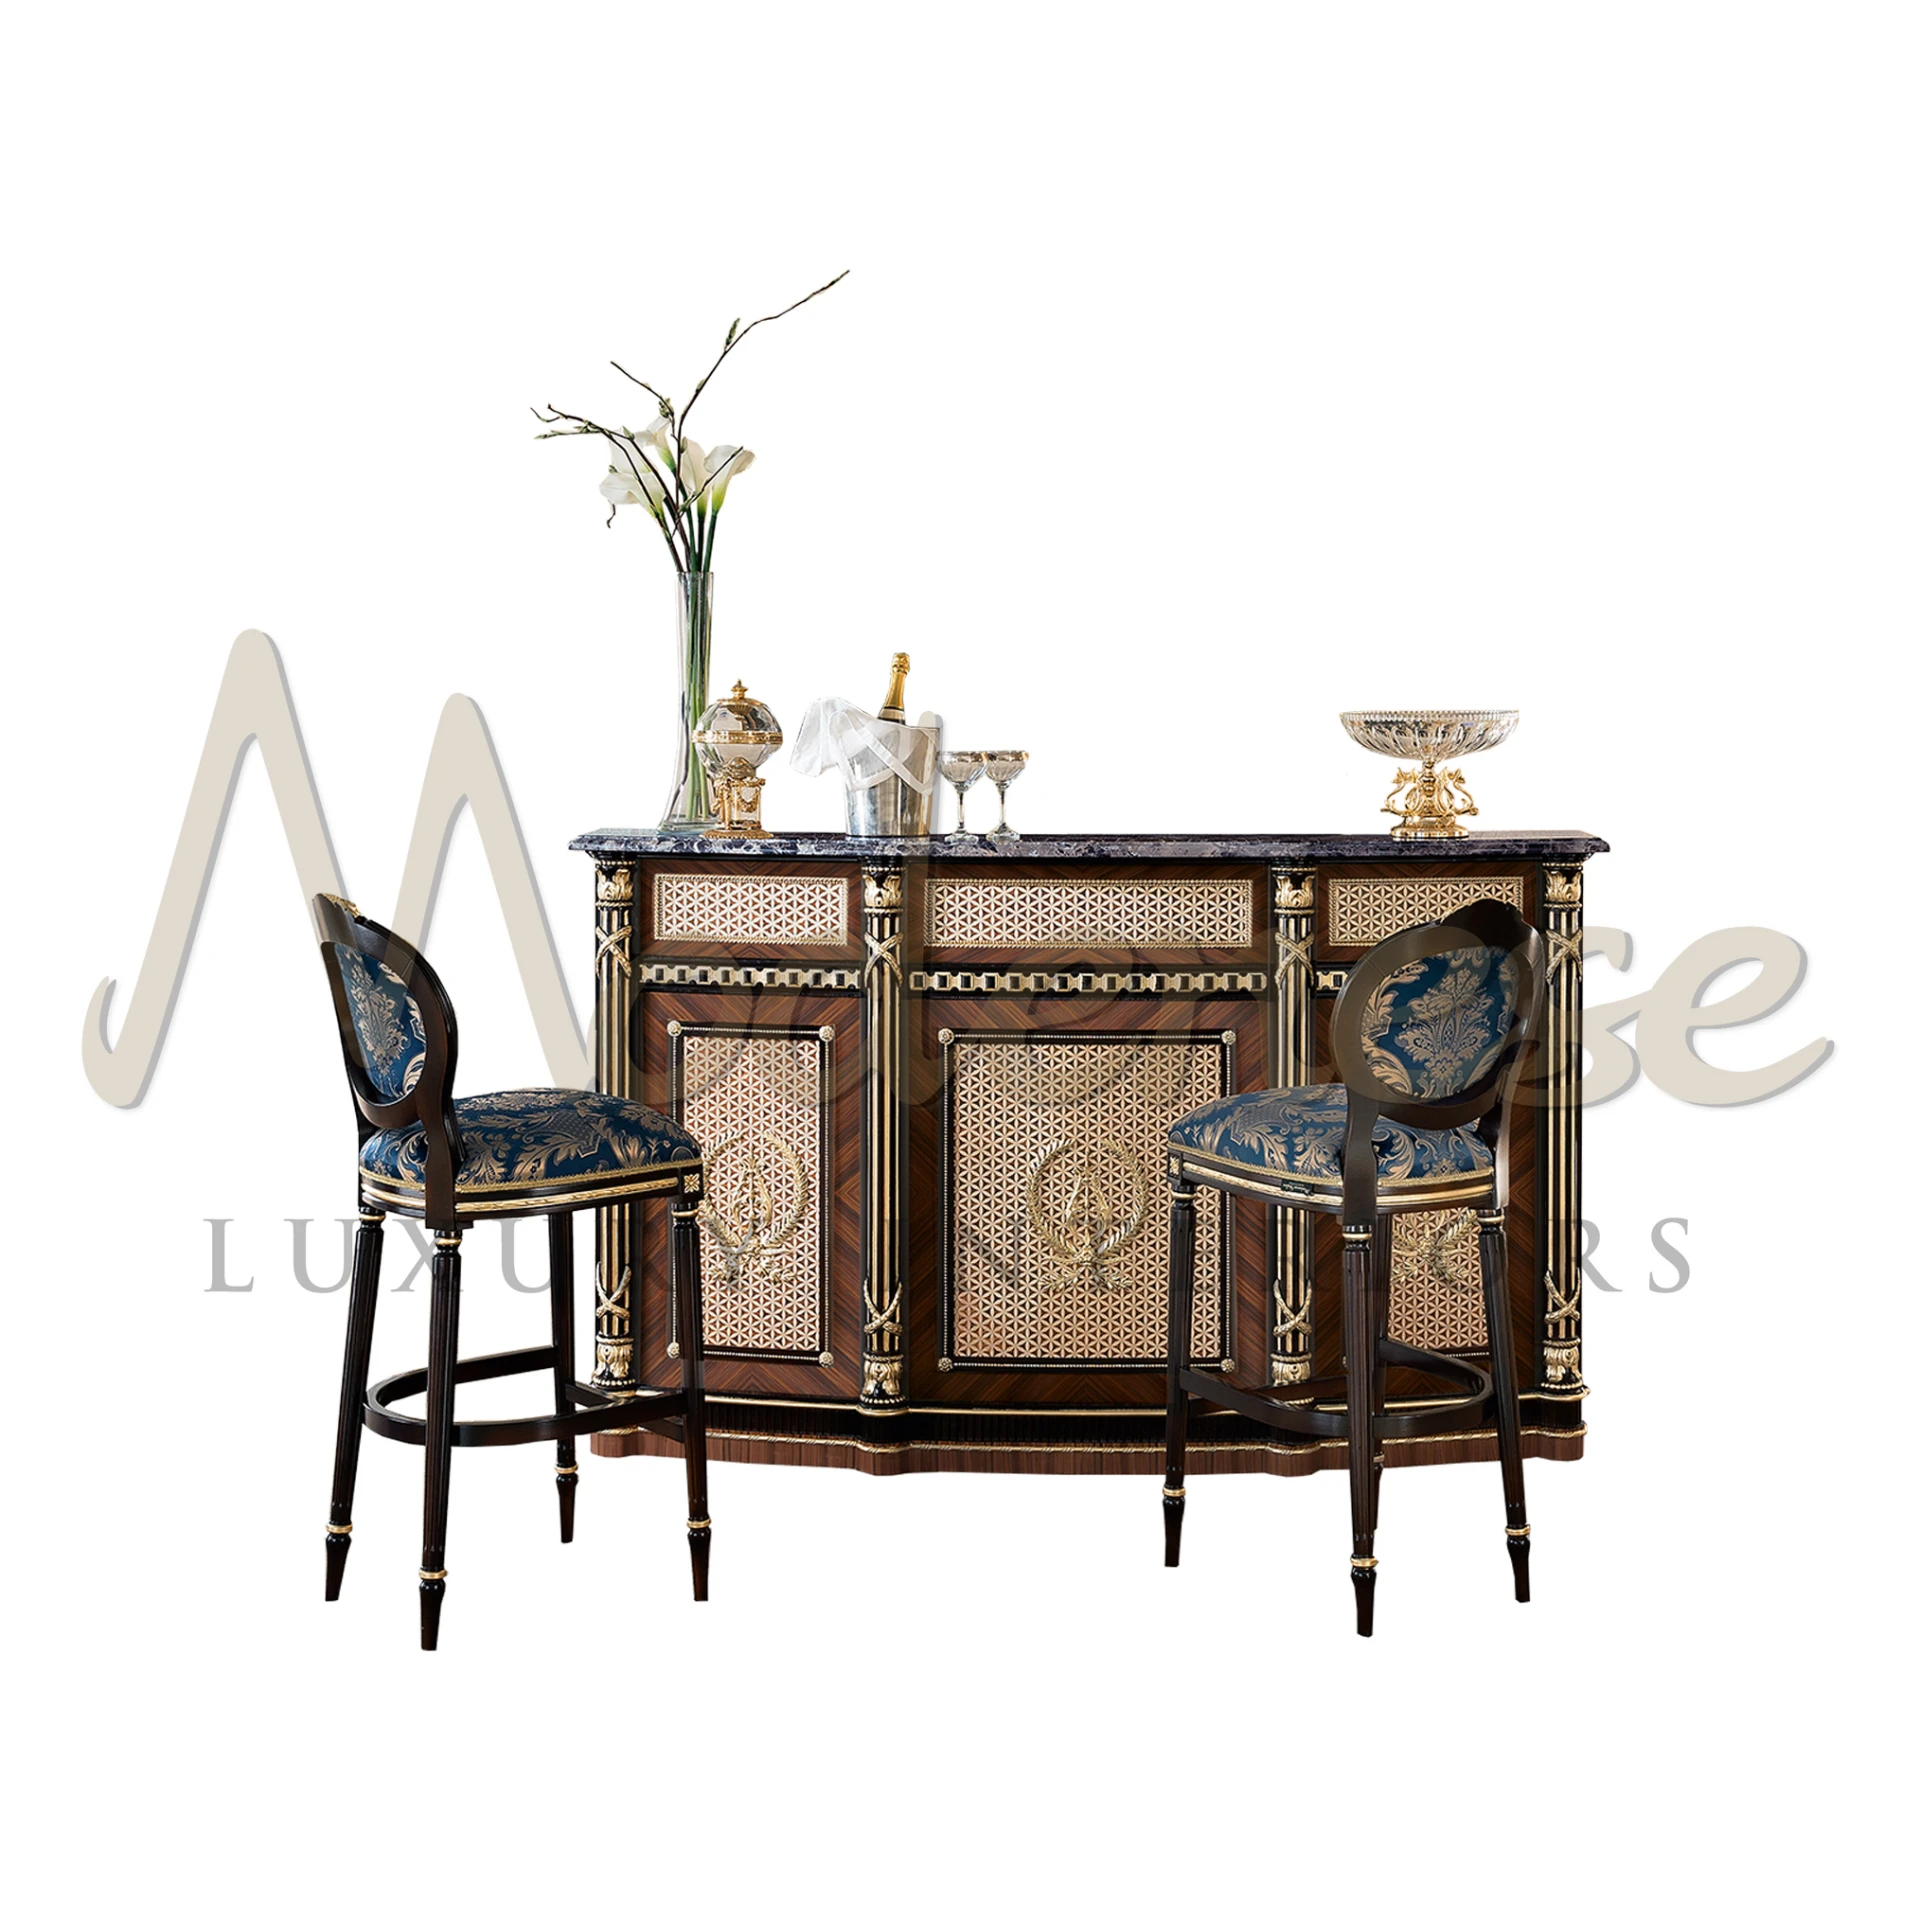 Impress your guests with Modenese Furniture's exquisite rosewood bar cabinet. Adorned with black lacquer, gold leaf, and intricate carvings.